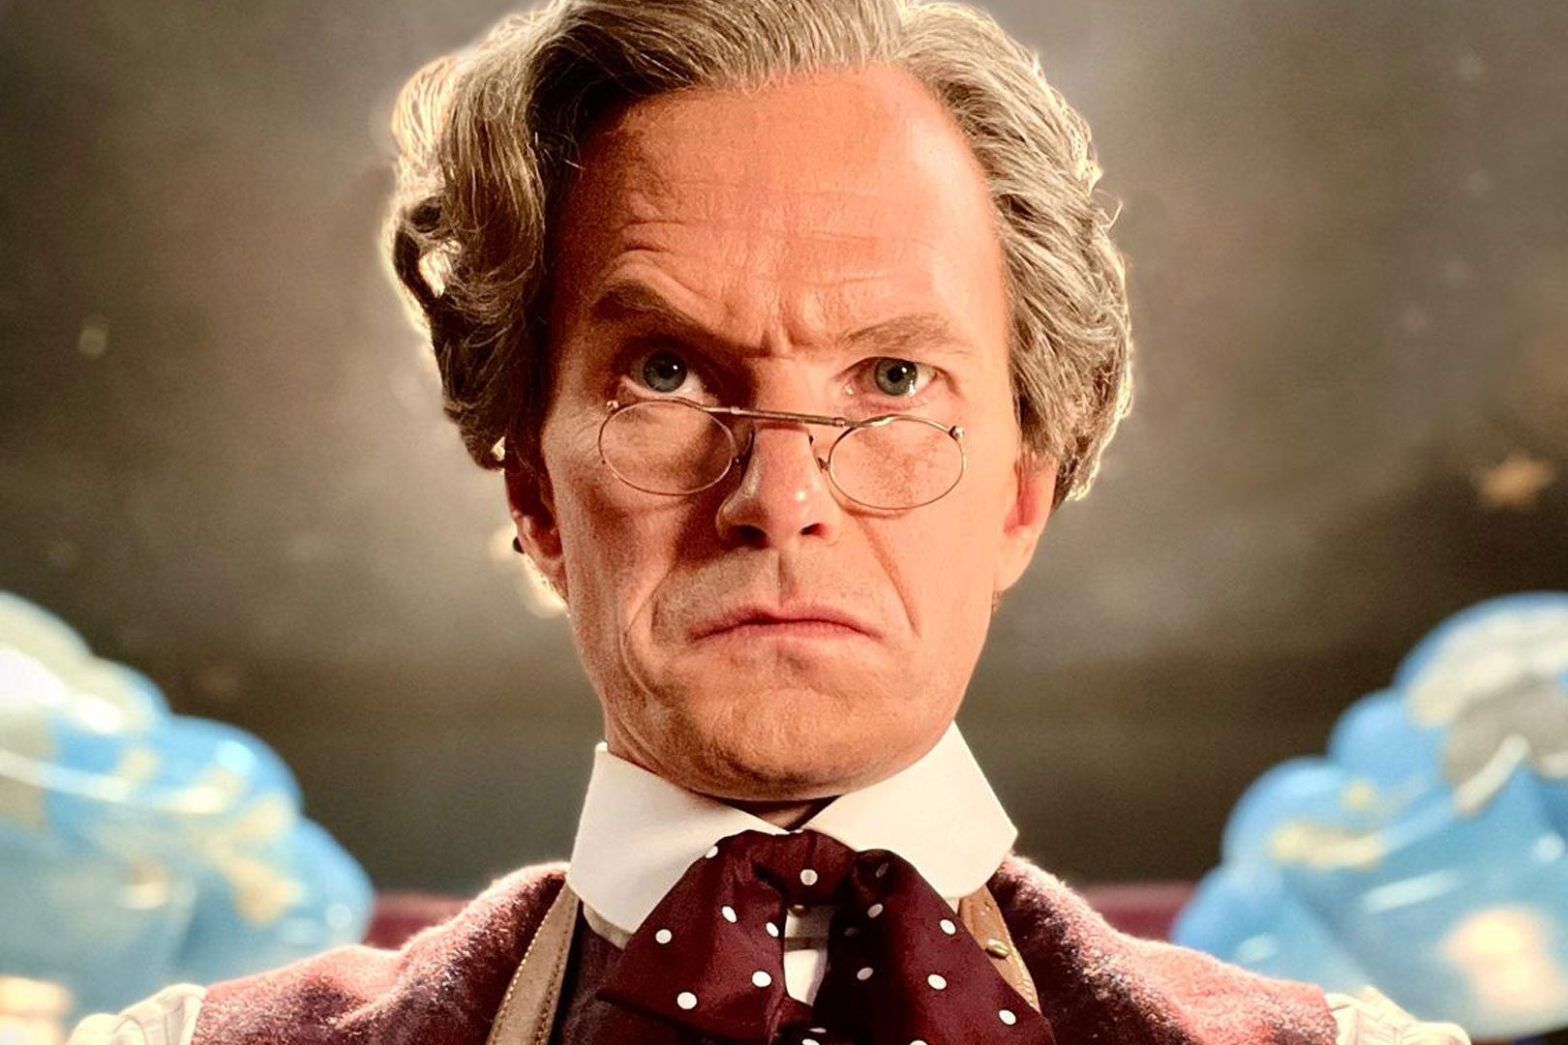 Neil Patrick Harris Joins the Cast of ‘Doctor Who’